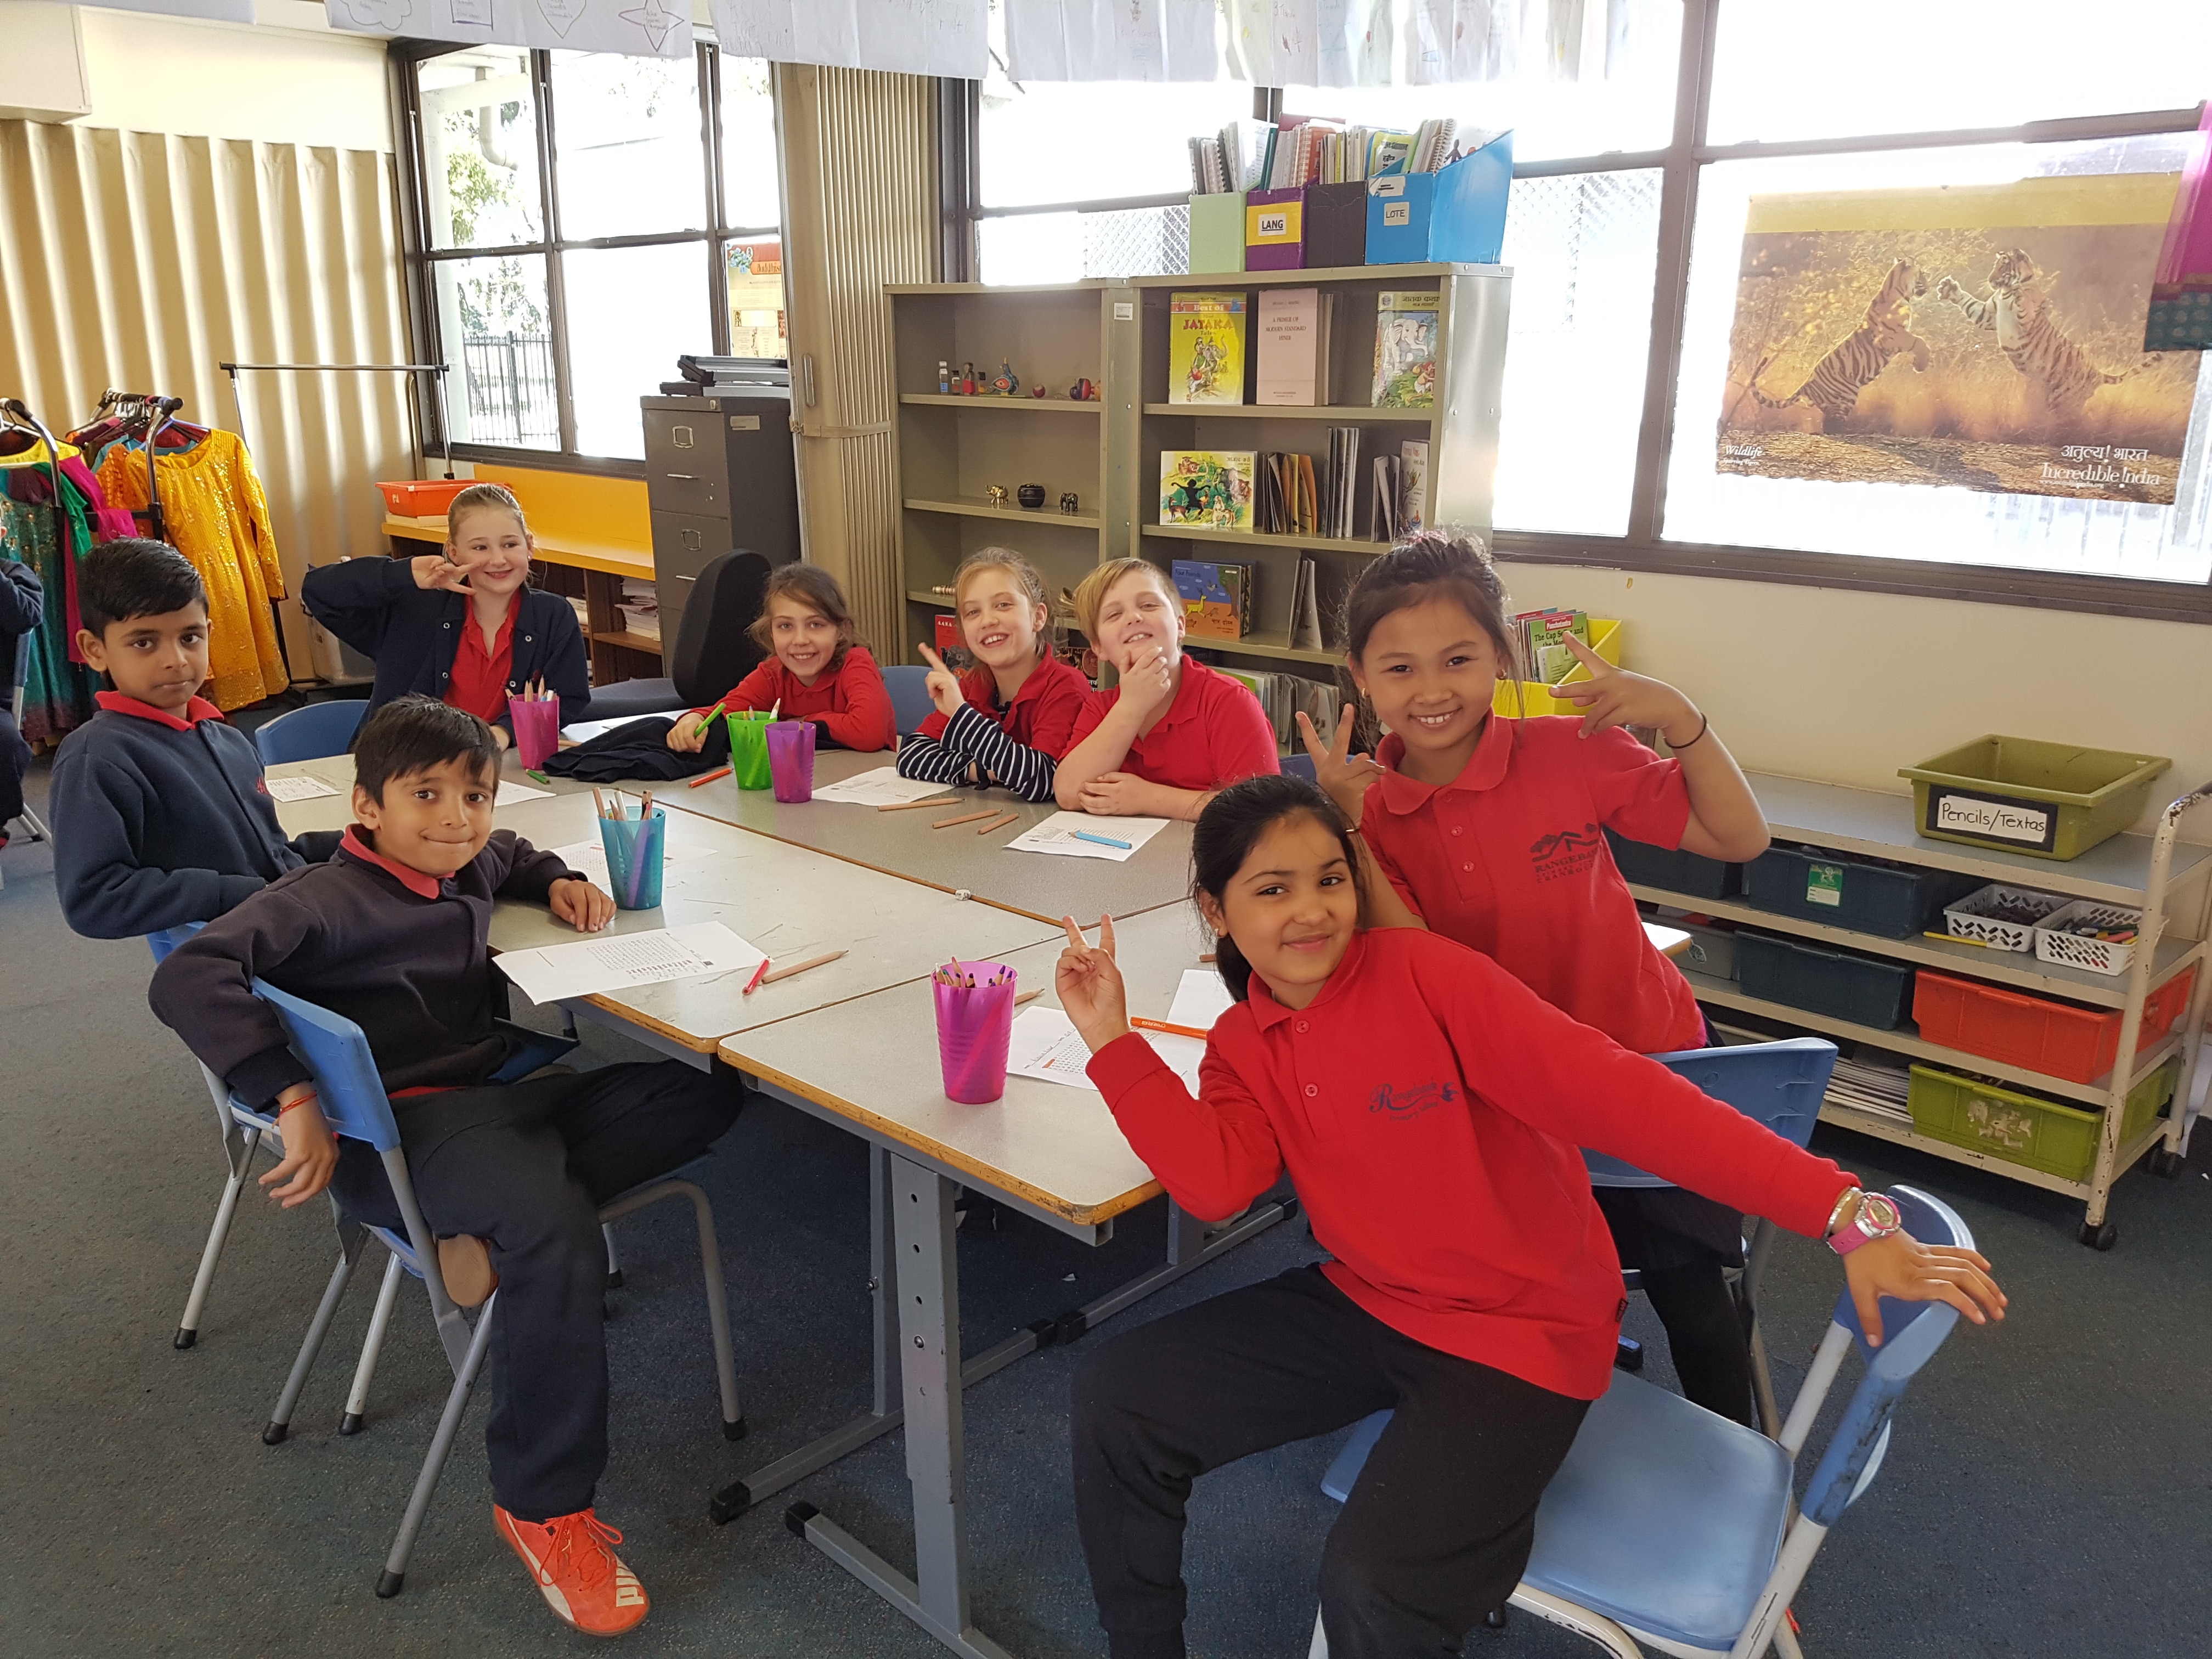 SBS Language | Love for Hindi prominent at this primary school in Australia